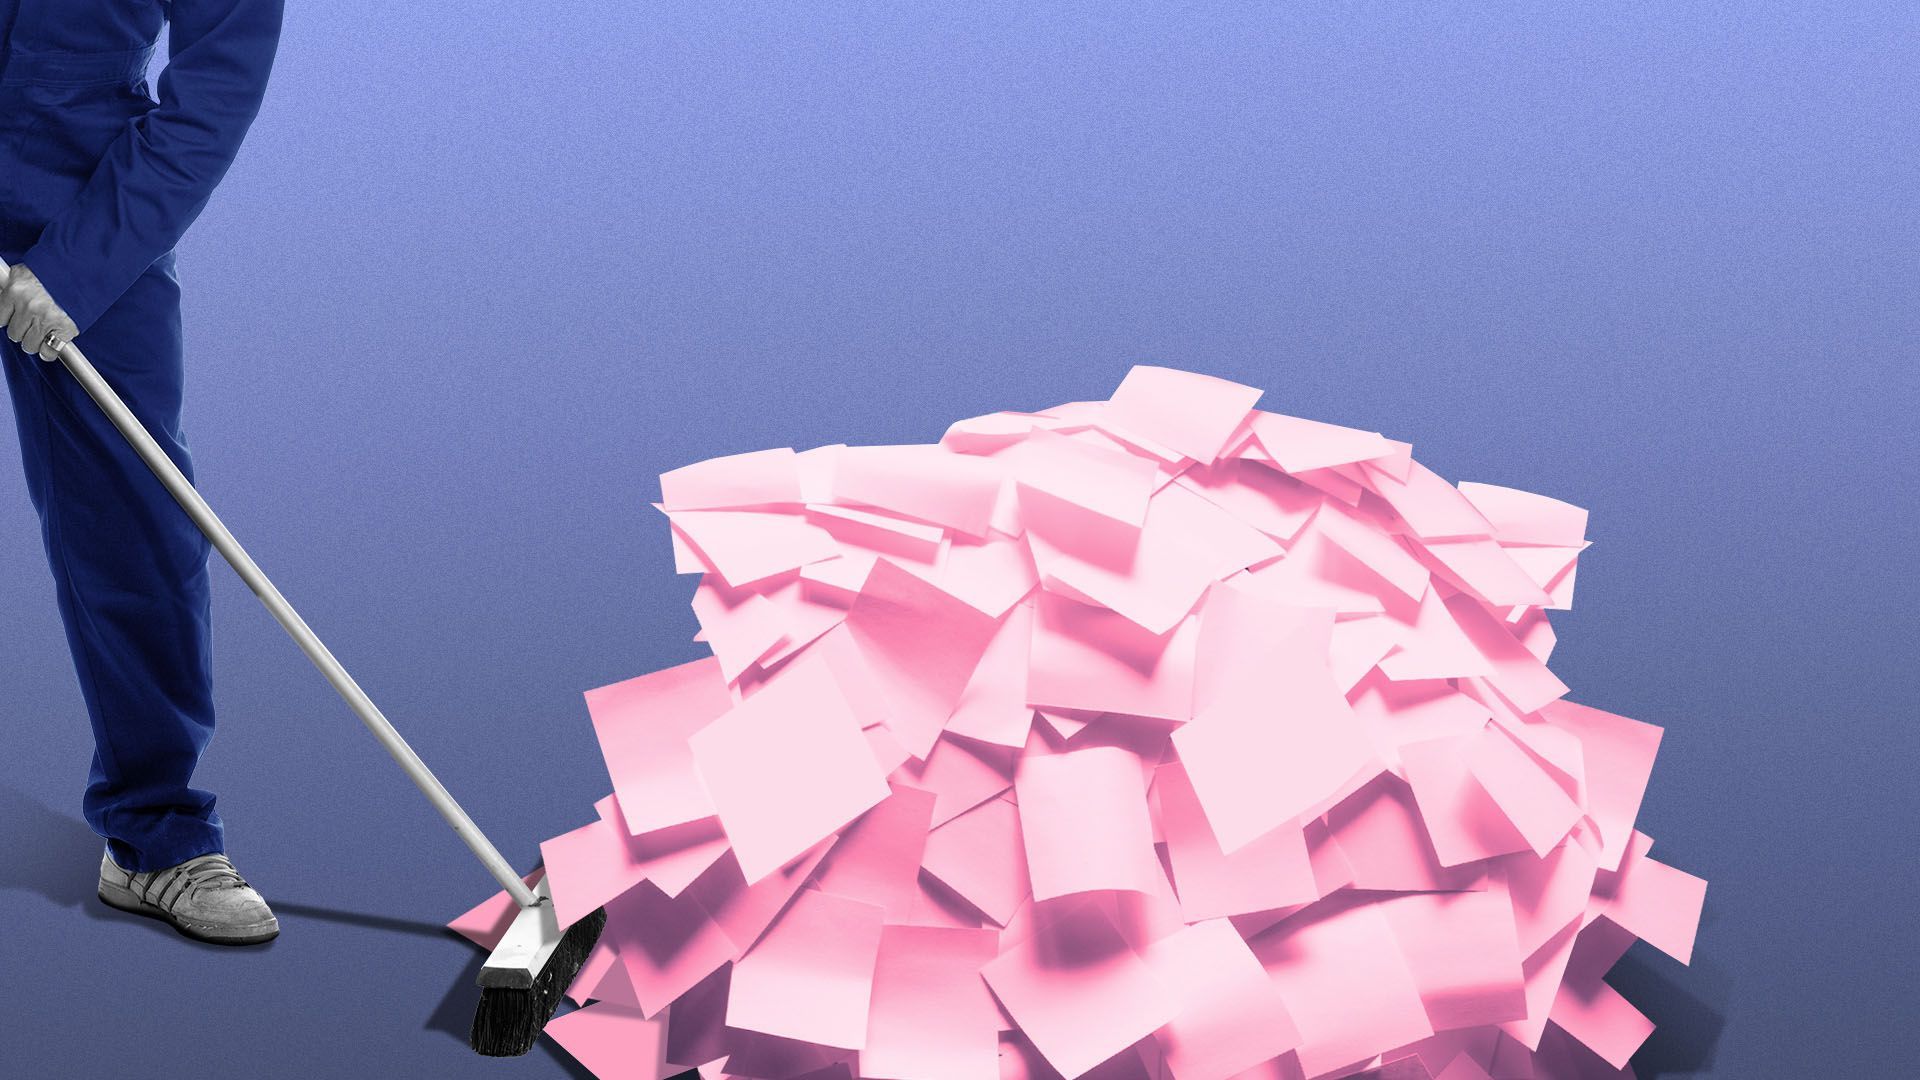 Illustration of a janitor pushing a pile of pink slips